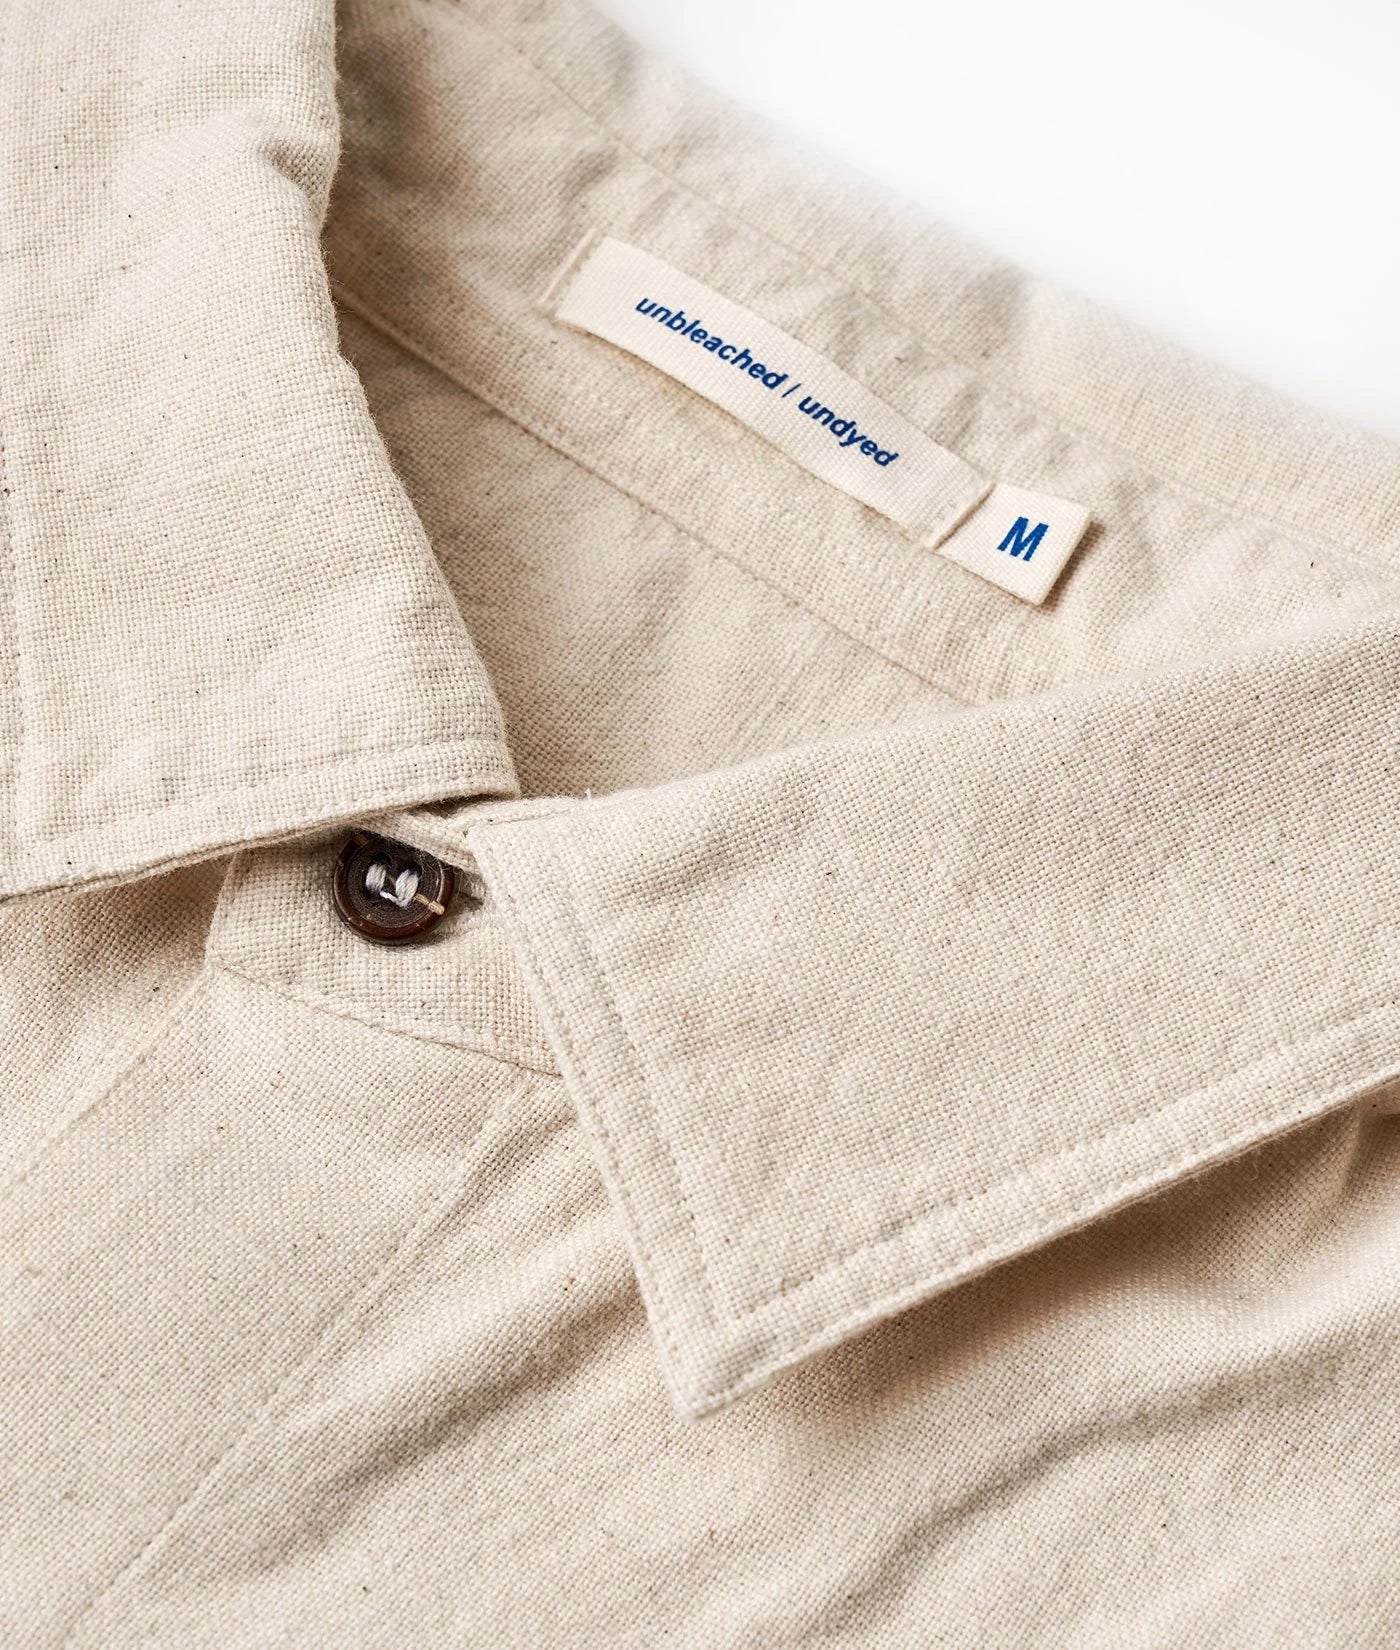 Industry of All Nations Pondi Shirt, Undyed